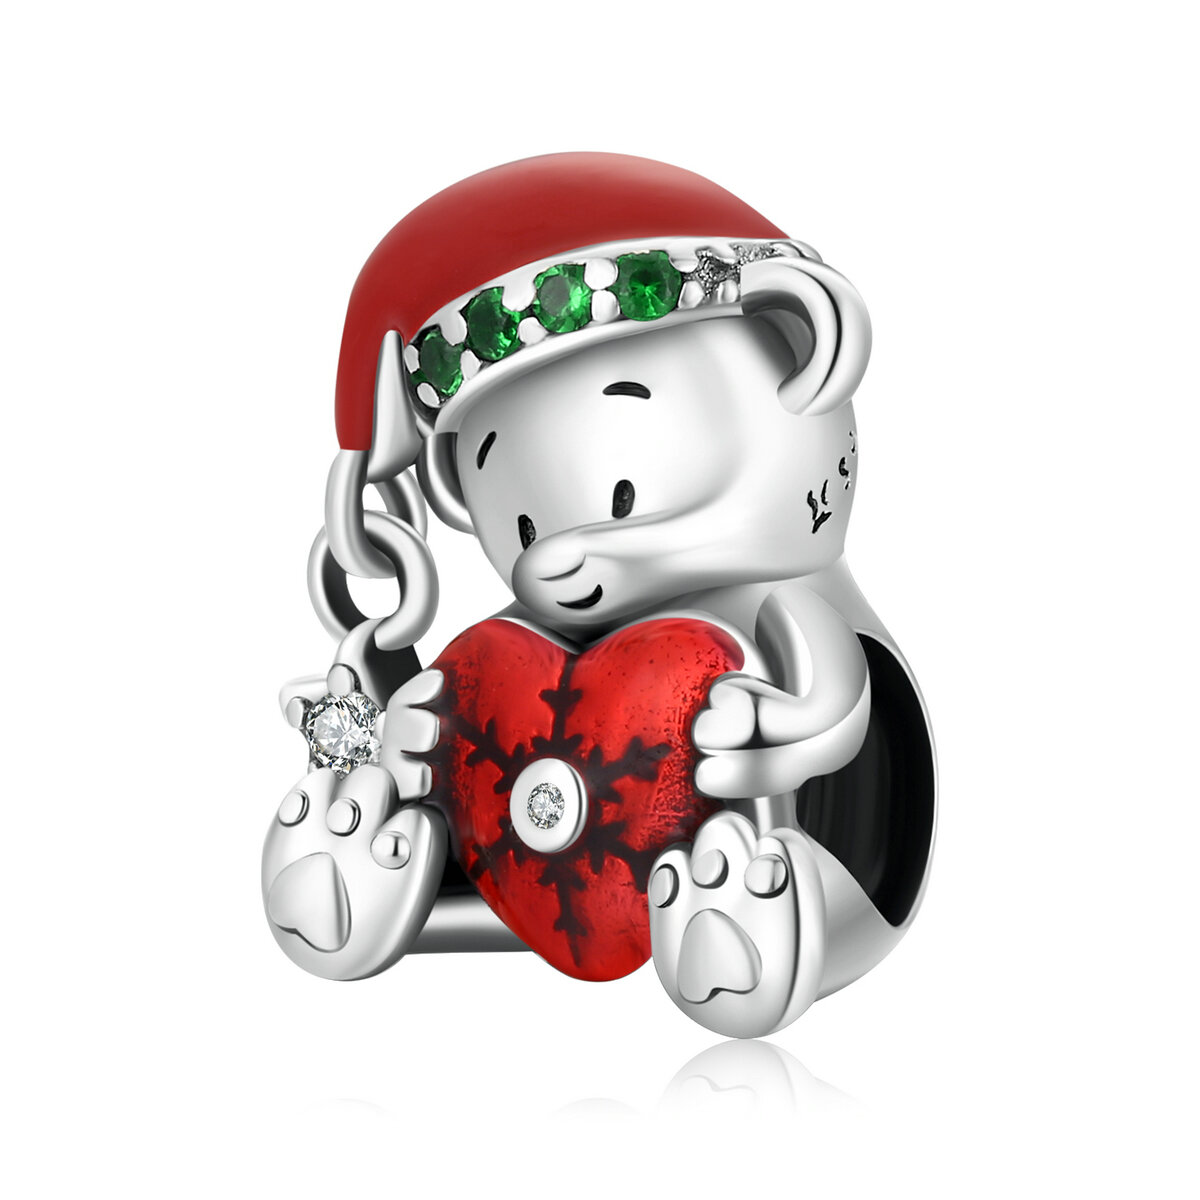 GemKing Wonderful Christmas Eve S925 Sterling Silver Charms